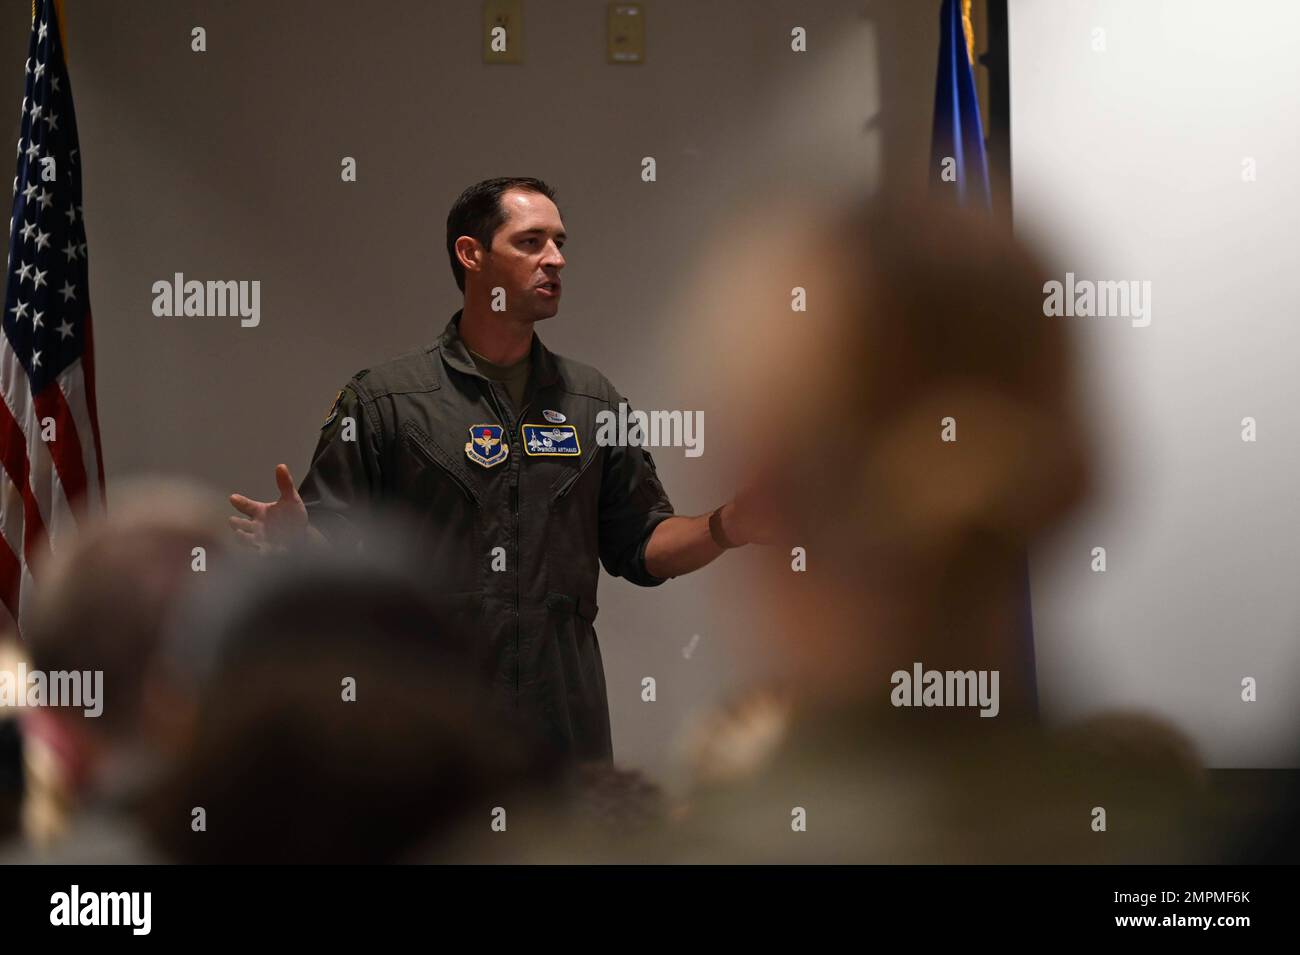 https://c8.alamy.com/comp/2MPMF6K/us-air-force-col-jack-arthaud-commander-of-the-33rd-fighter-wing-eglin-air-force-base-florida-speaks-to-members-of-the-337th-air-control-squadron-during-an-all-call-at-tyndall-air-force-base-florida-nov-4-2022-the-337th-acs-is-a-geologically-separated-unit-within-the-33rd-fighter-wing-responsible-for-training-air-battle-managers-to-be-highly-skilled-mission-focused-airmen-and-delivering-world-class-battle-management-and-force-development-2MPMF6K.jpg